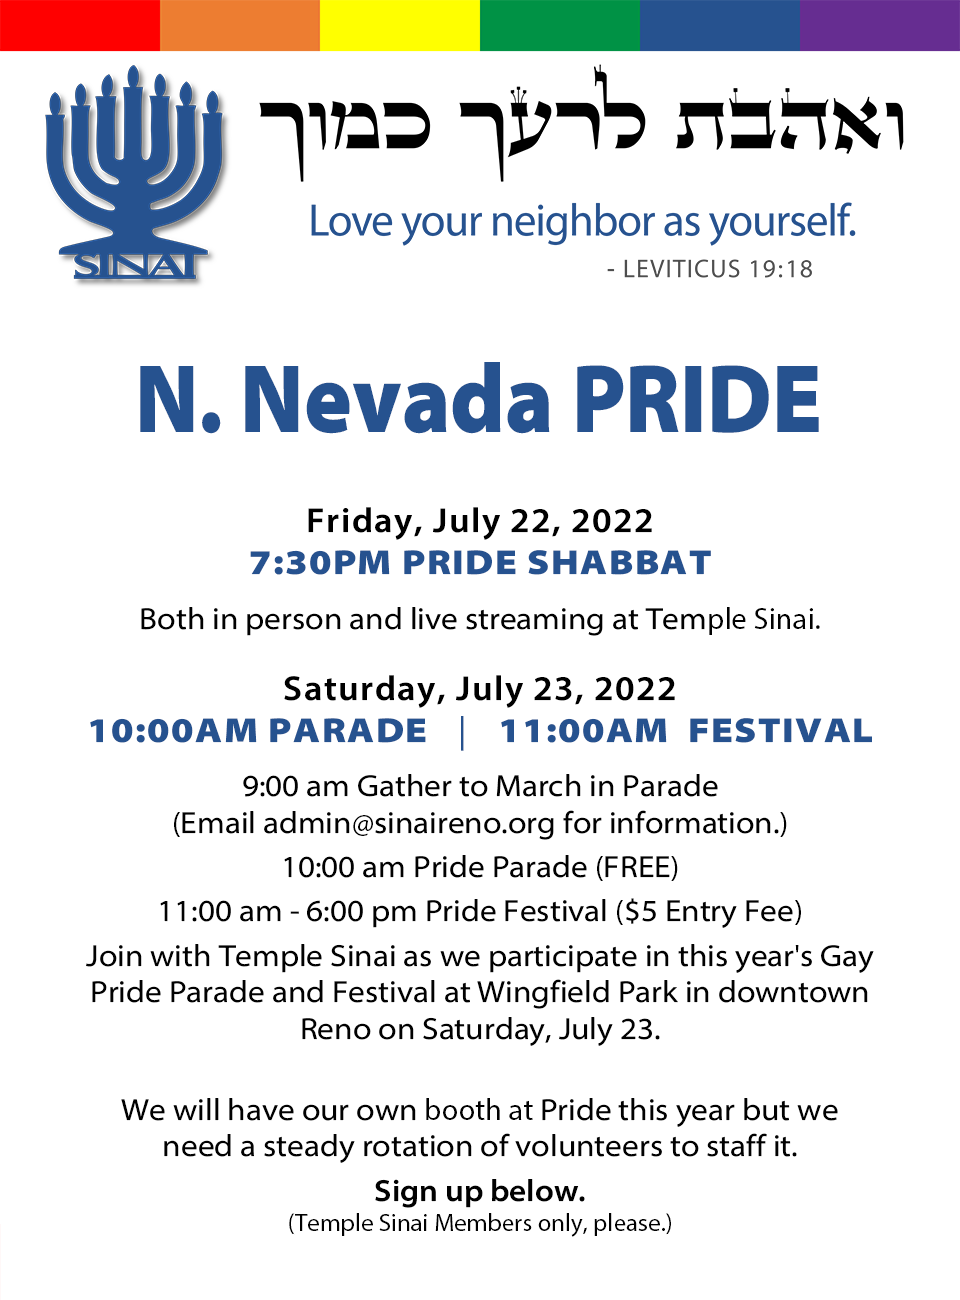 Join Temple Sinai at Northern Nevada Pride this year on Friday, July 22, 2022 at 7:30 pm for our Pride Shabbat service, both in person and live streaming, at Temple Sinai. Saturday, July 23, 2022 at 10:00 am Pride Parade and 11:00 am Pride Festival. Join us at 9:00 am as we gather to March in the parade. Email admin@sinaireno.org for information. The parade will begin at 10:00 am and is free to attend. The festival will go from 11:00 am to 6:00 pm and there is a $5 entry fee. Join with Temple sinai as we participate this year in both the Gay Pride Parade and Festival at Wingfield Park in downtown Reno on Saturday, July 23. We will have our own Pride booth this year but we need a steady rotation of volunteers to staff it. Sign up below. (Temple Sinai members only, please.)